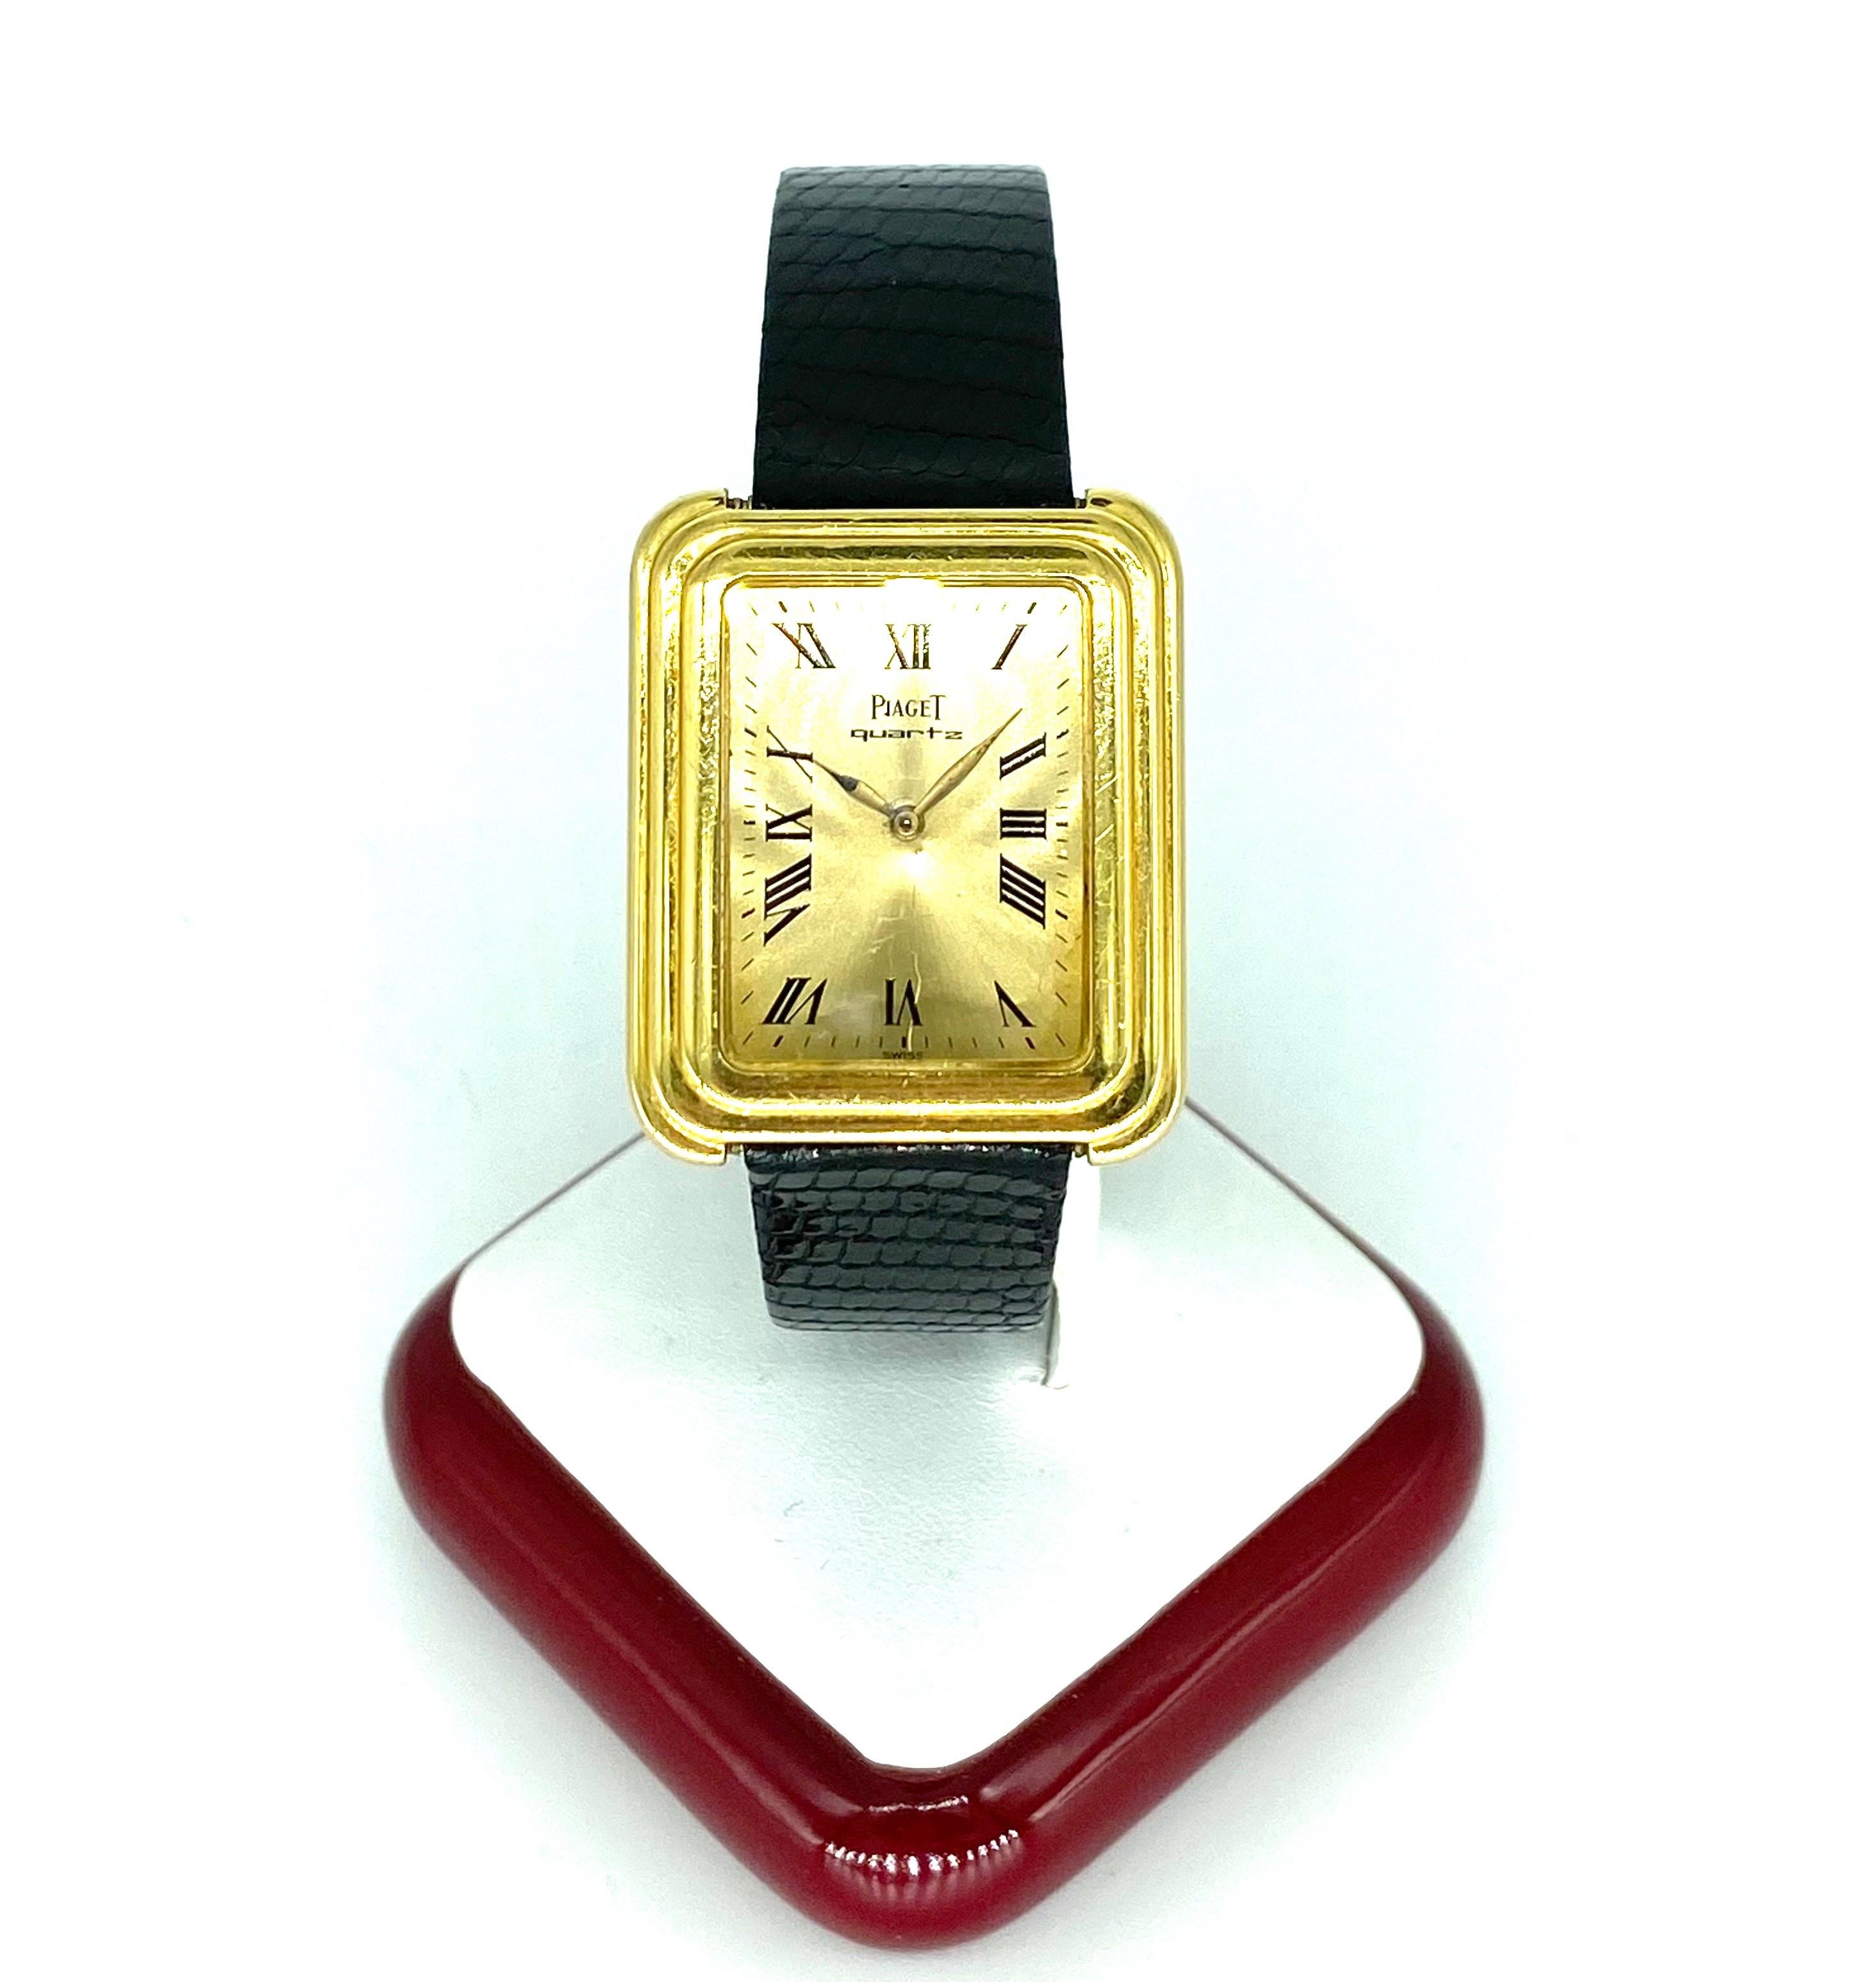 Vintage man’s Piaget 18K gold rectangular dress watch with pronounced stepped case design, original champagne dial with printed black Roman figures and blued steel leaf style hands. Case measures 28 x 33mm with flat sapphire crystal and with back